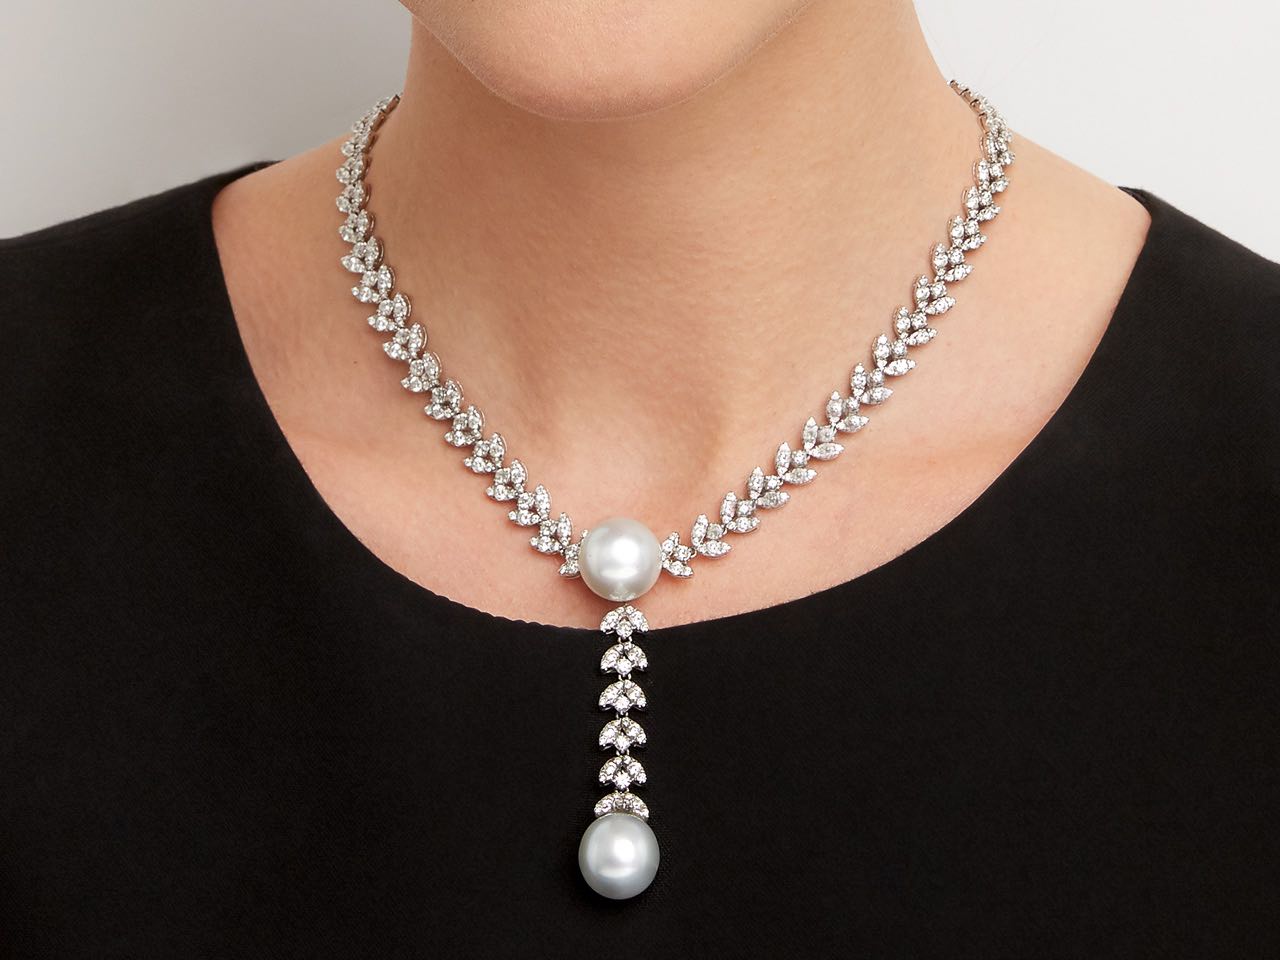 South Sea Pearl and Diamond Necklace in 18K White Gold